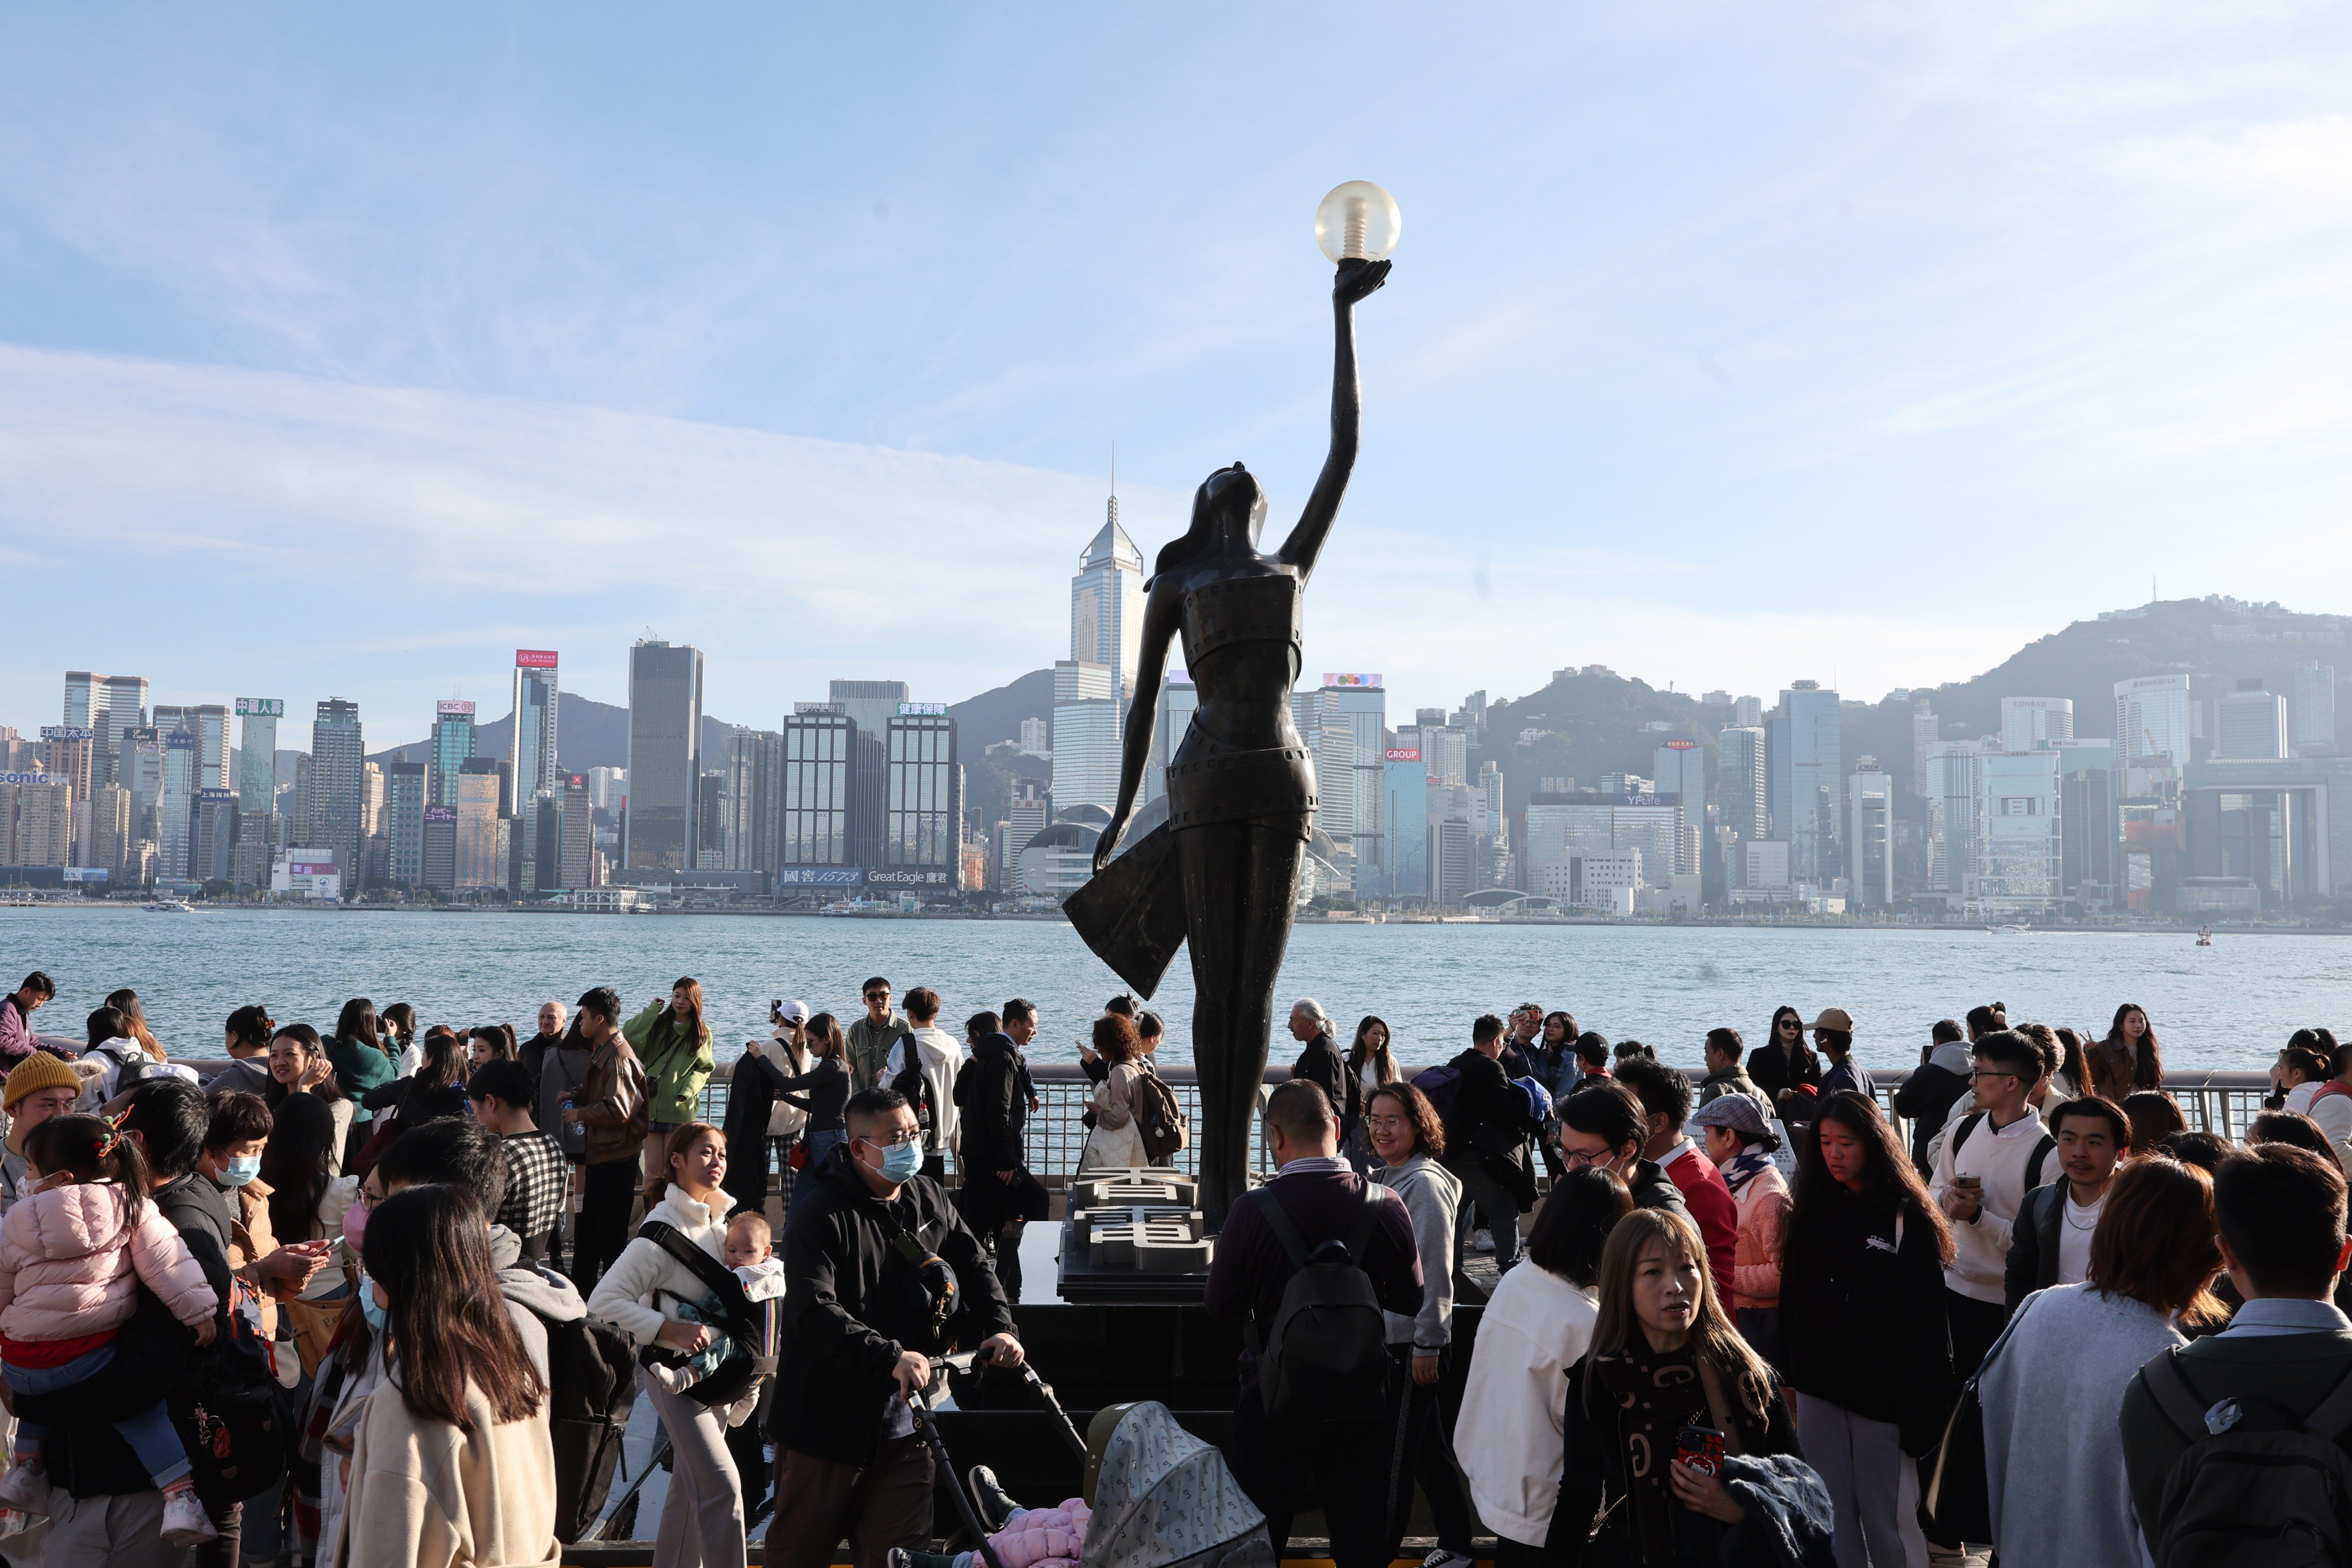 scmp.com - SCMP Editorial - Opinion | Still some way to go as Hong Kong tourism recovers